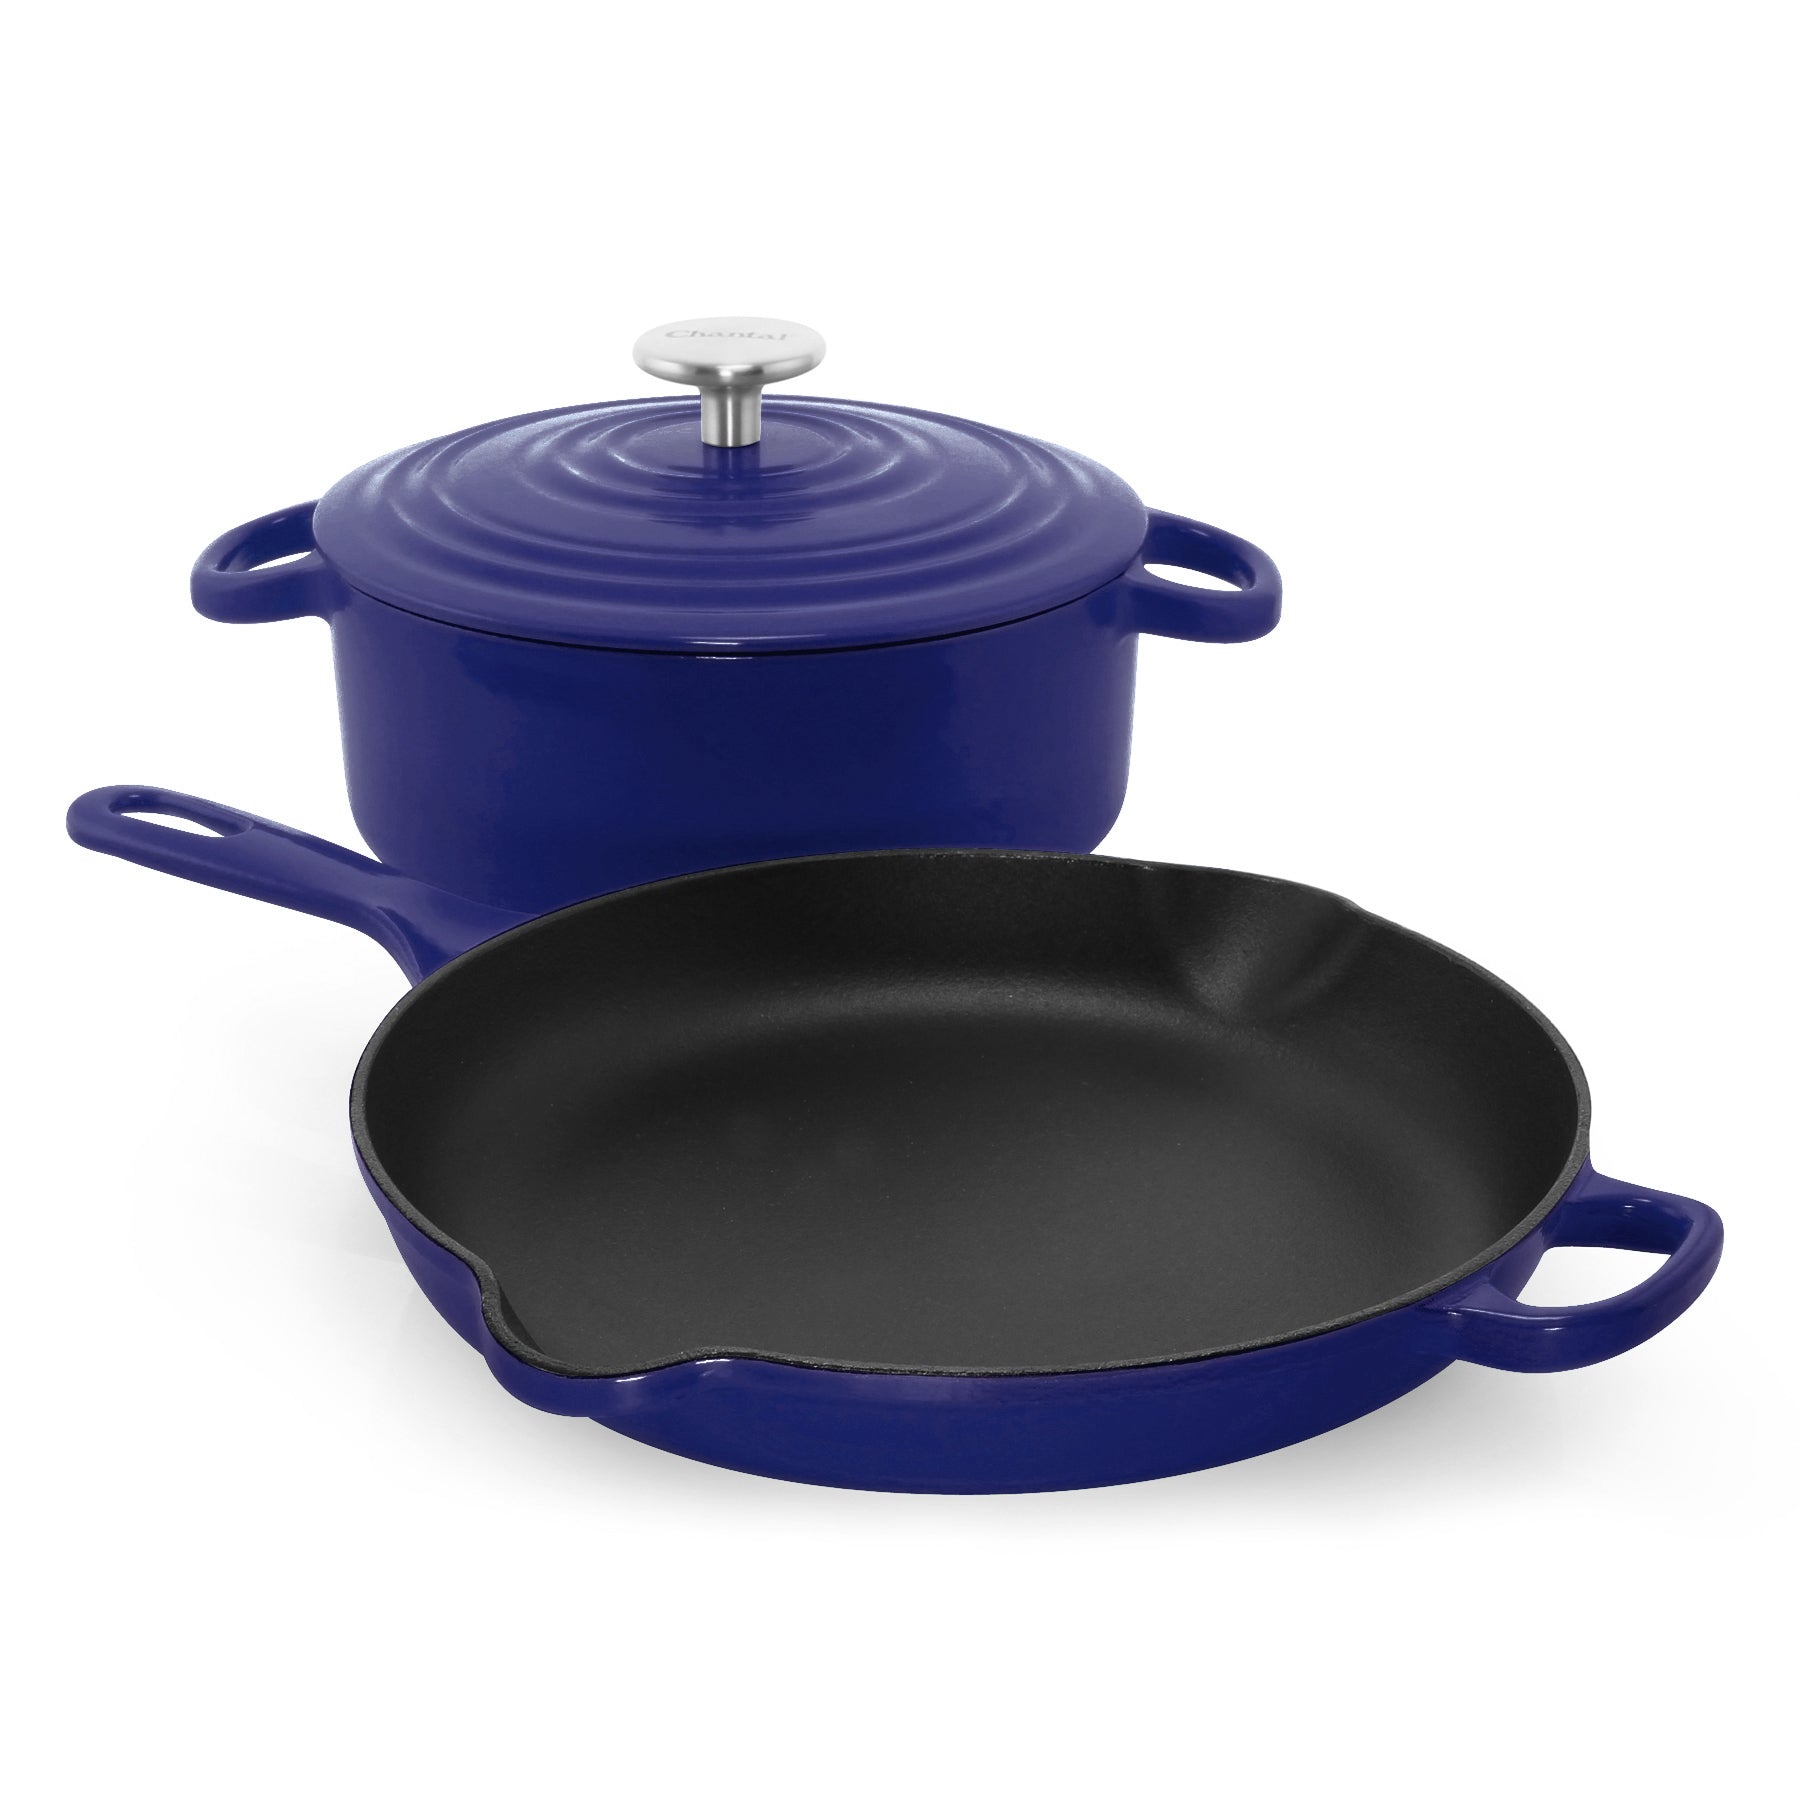  Suteck Enameled Cast Iron 2-In-1 Skillet Set, Heavy Duty 3.2  Quart Enamel Cookware Pot and Lid Set, Deep Saucepan and Shallow Skillet  Dutch Oven Nonstick Frying Pan for Chef Kitchen (Blue)